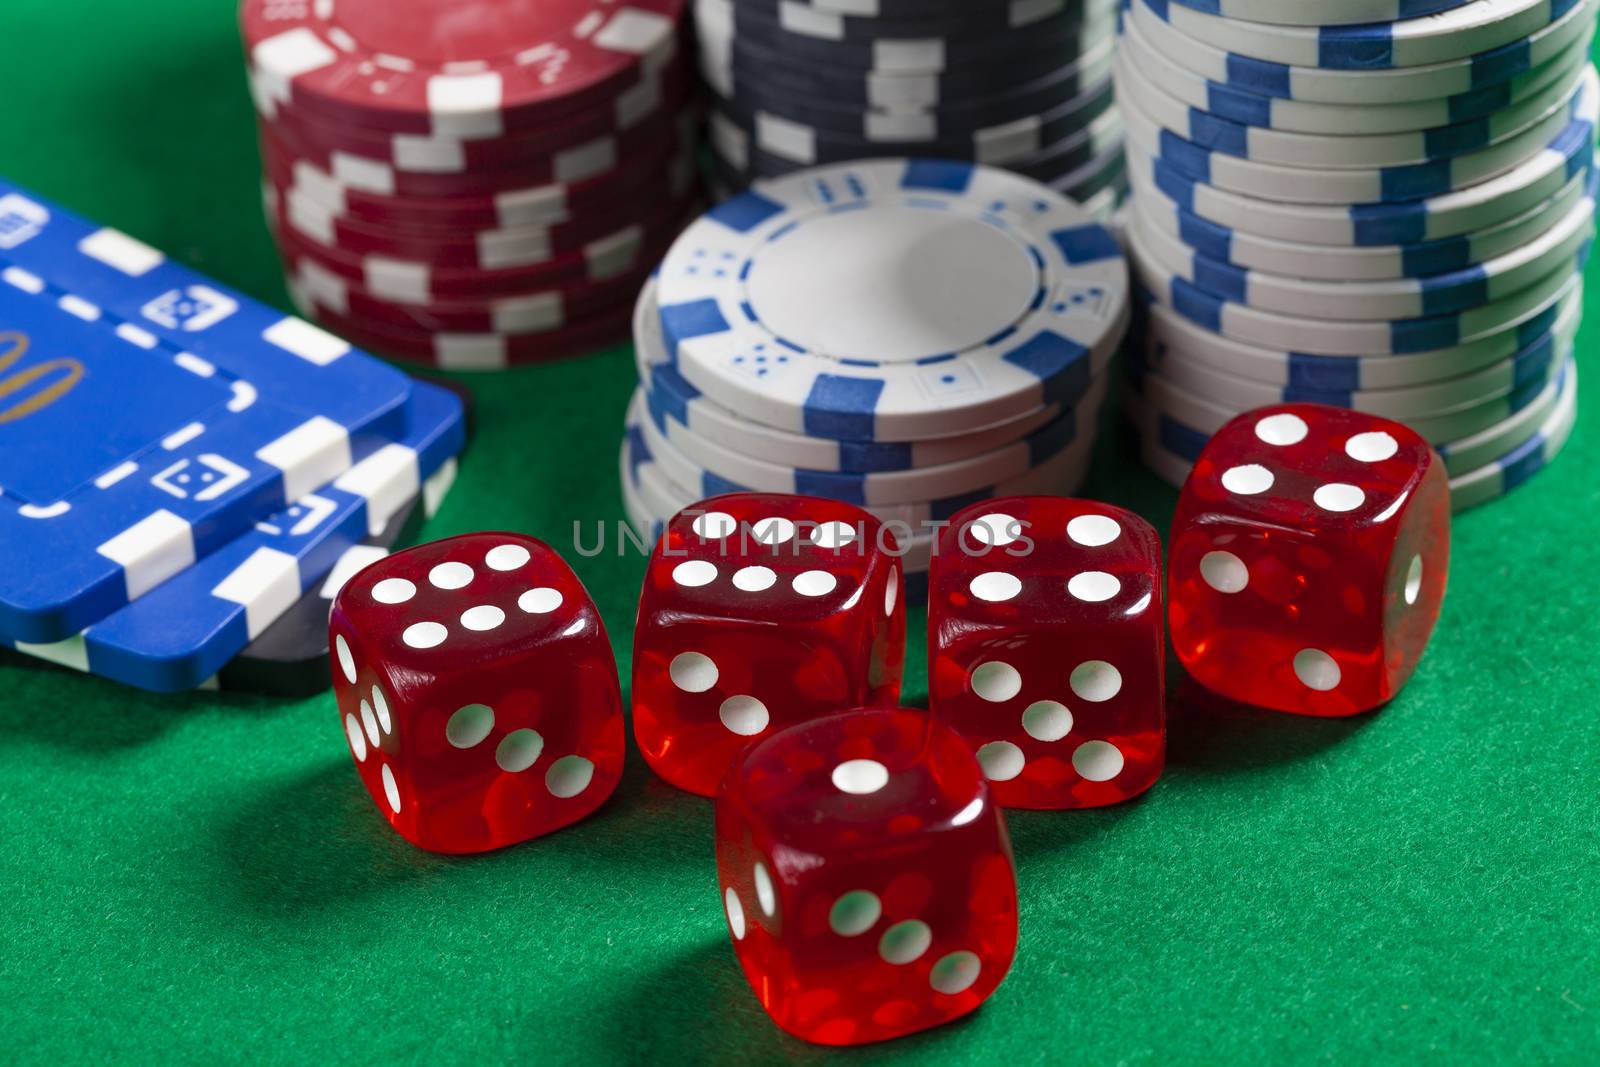 Red Dice and Casino Chips on Green Poker Table